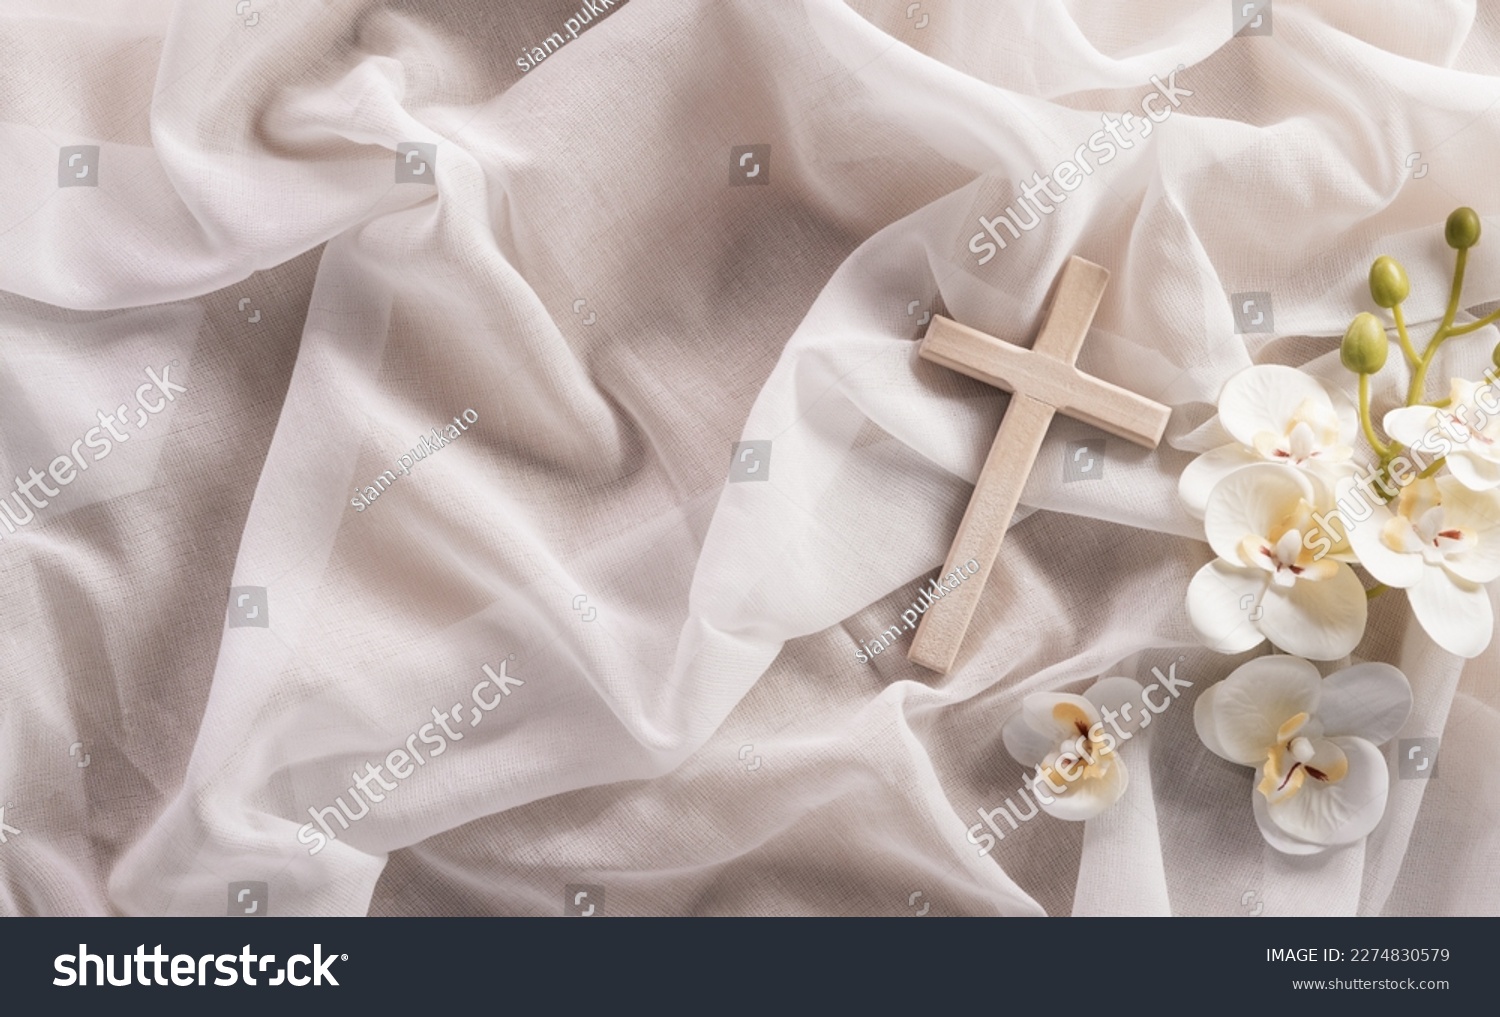 Good Friday and Holy week concept - A religious cross and flower on white fabric background. #2274830579